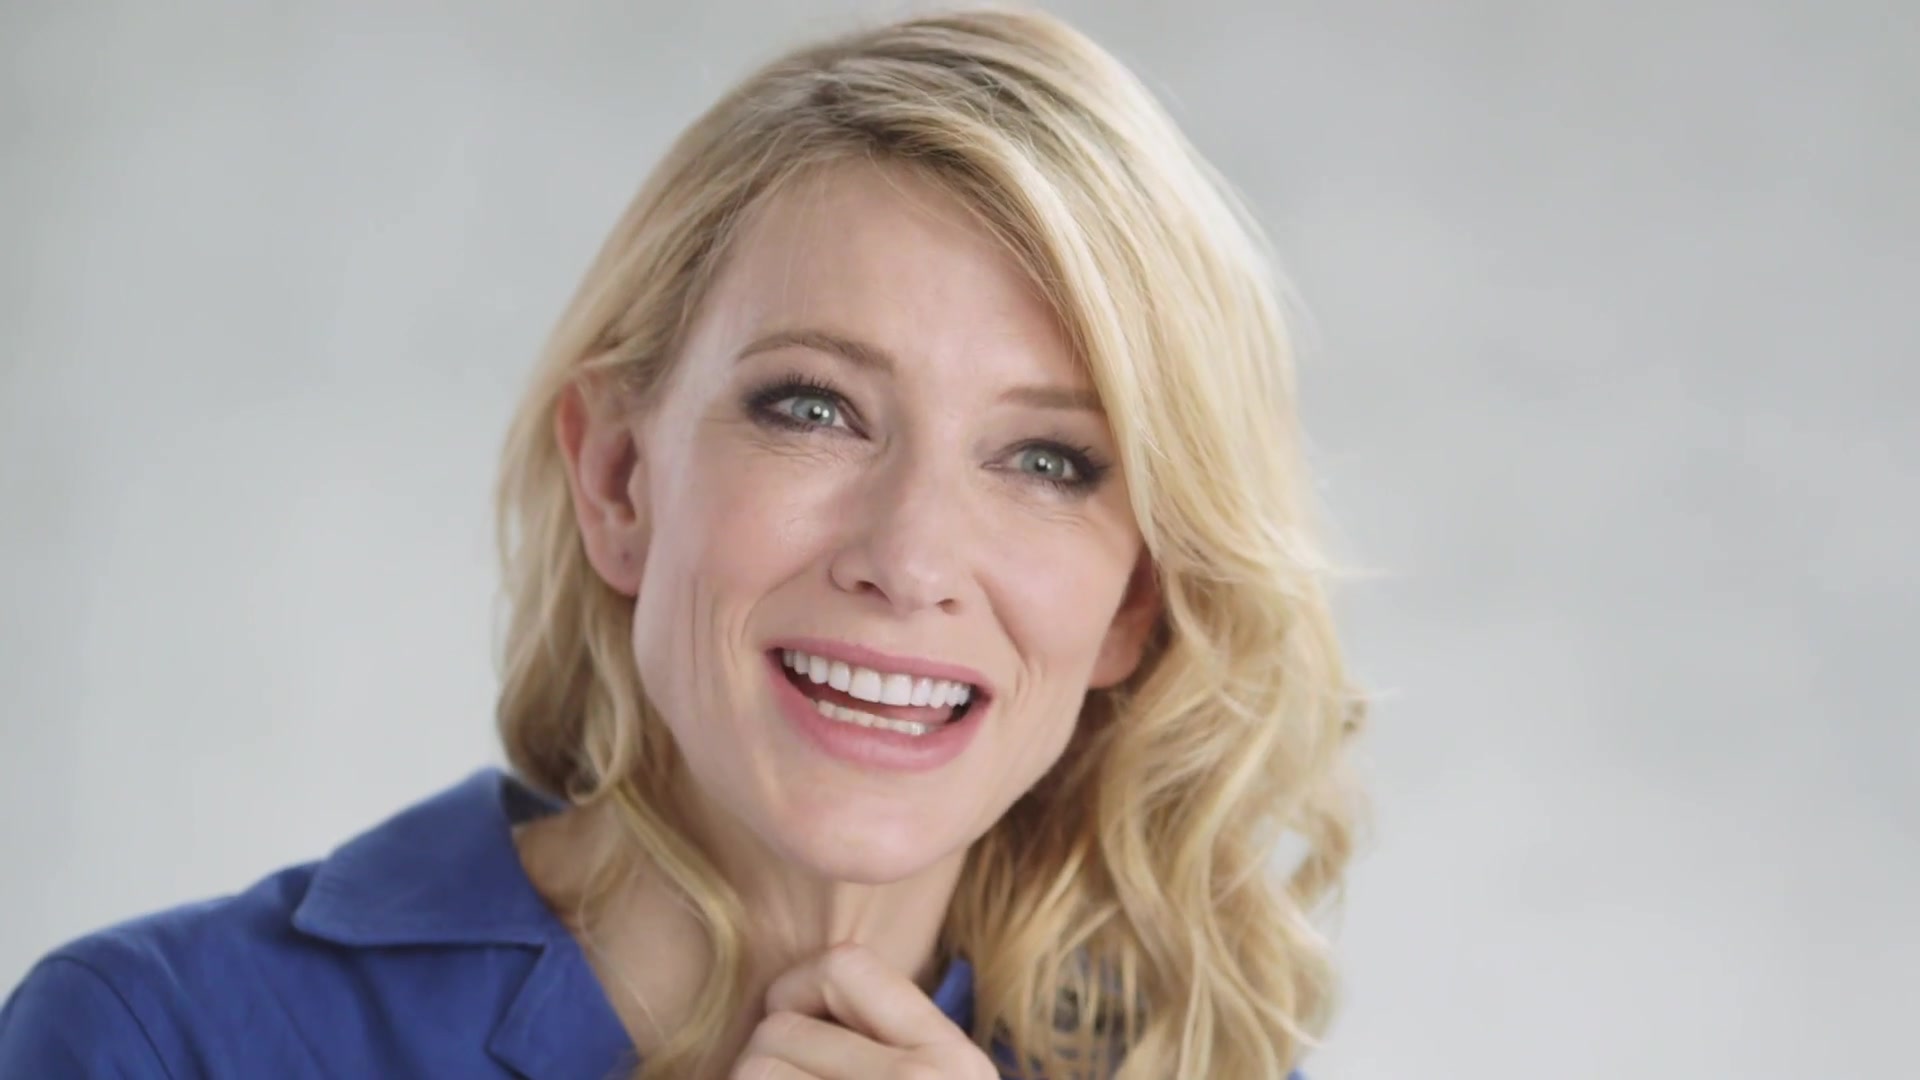 Watch Cate Blanchett Show Off Her Gymnastic Secret Talent & Talks about her Legacy